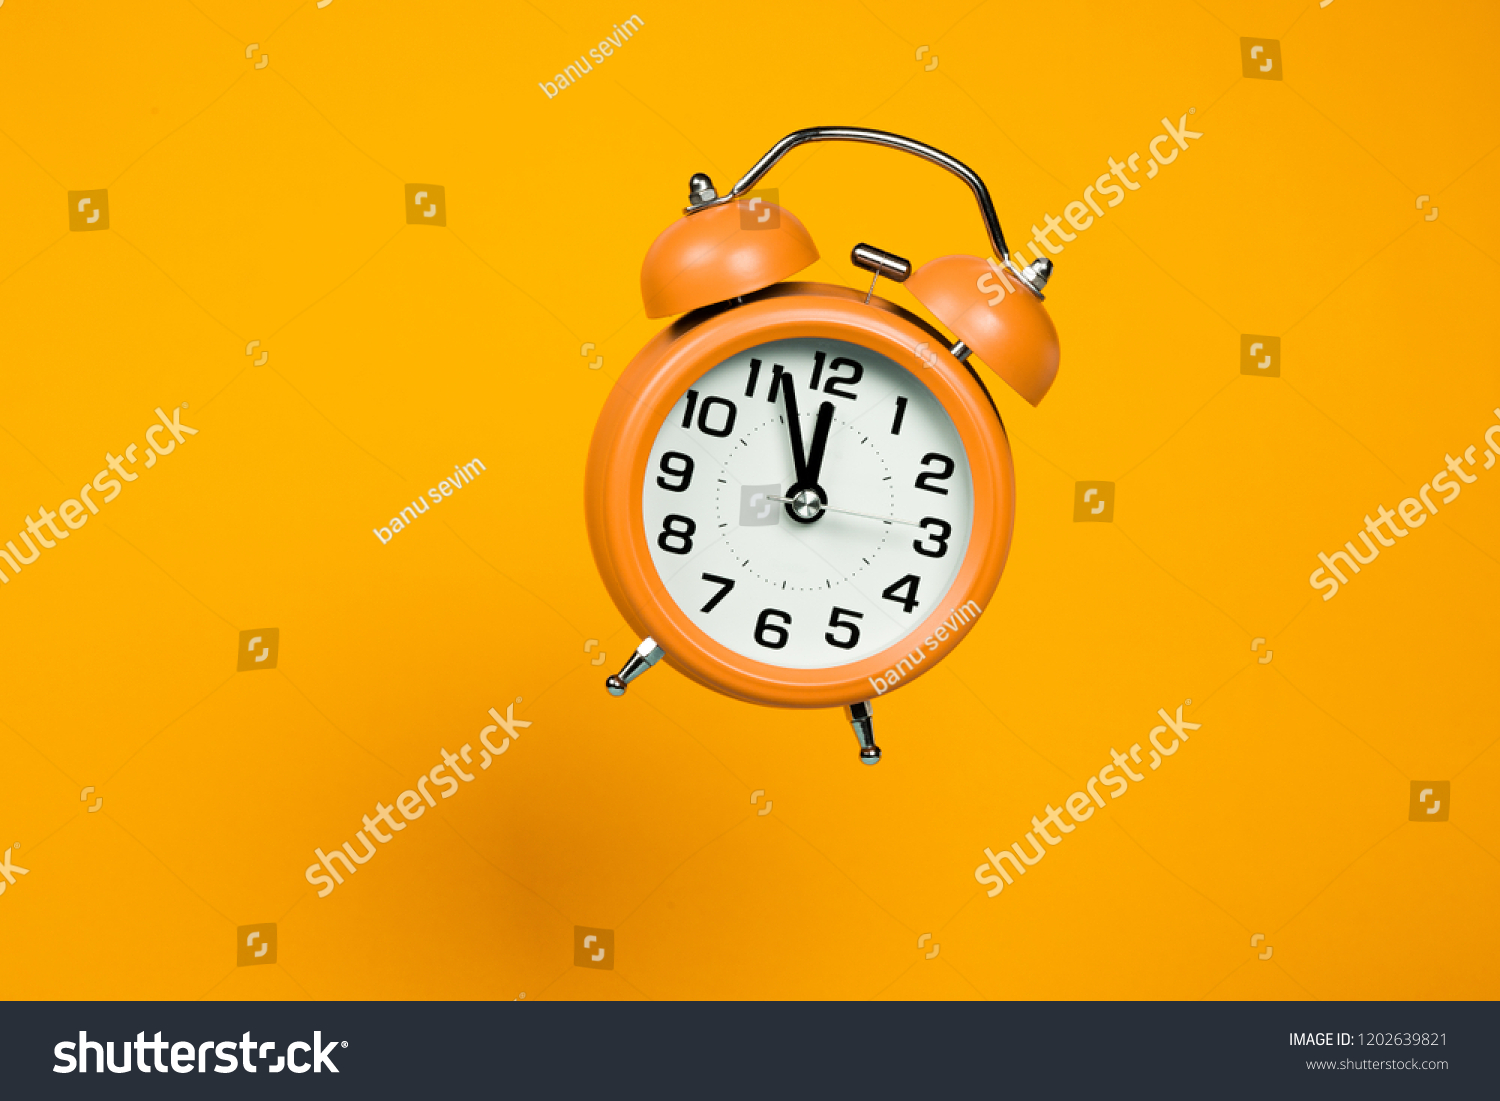 ClassicDesktopClock 4.44 download the new for apple